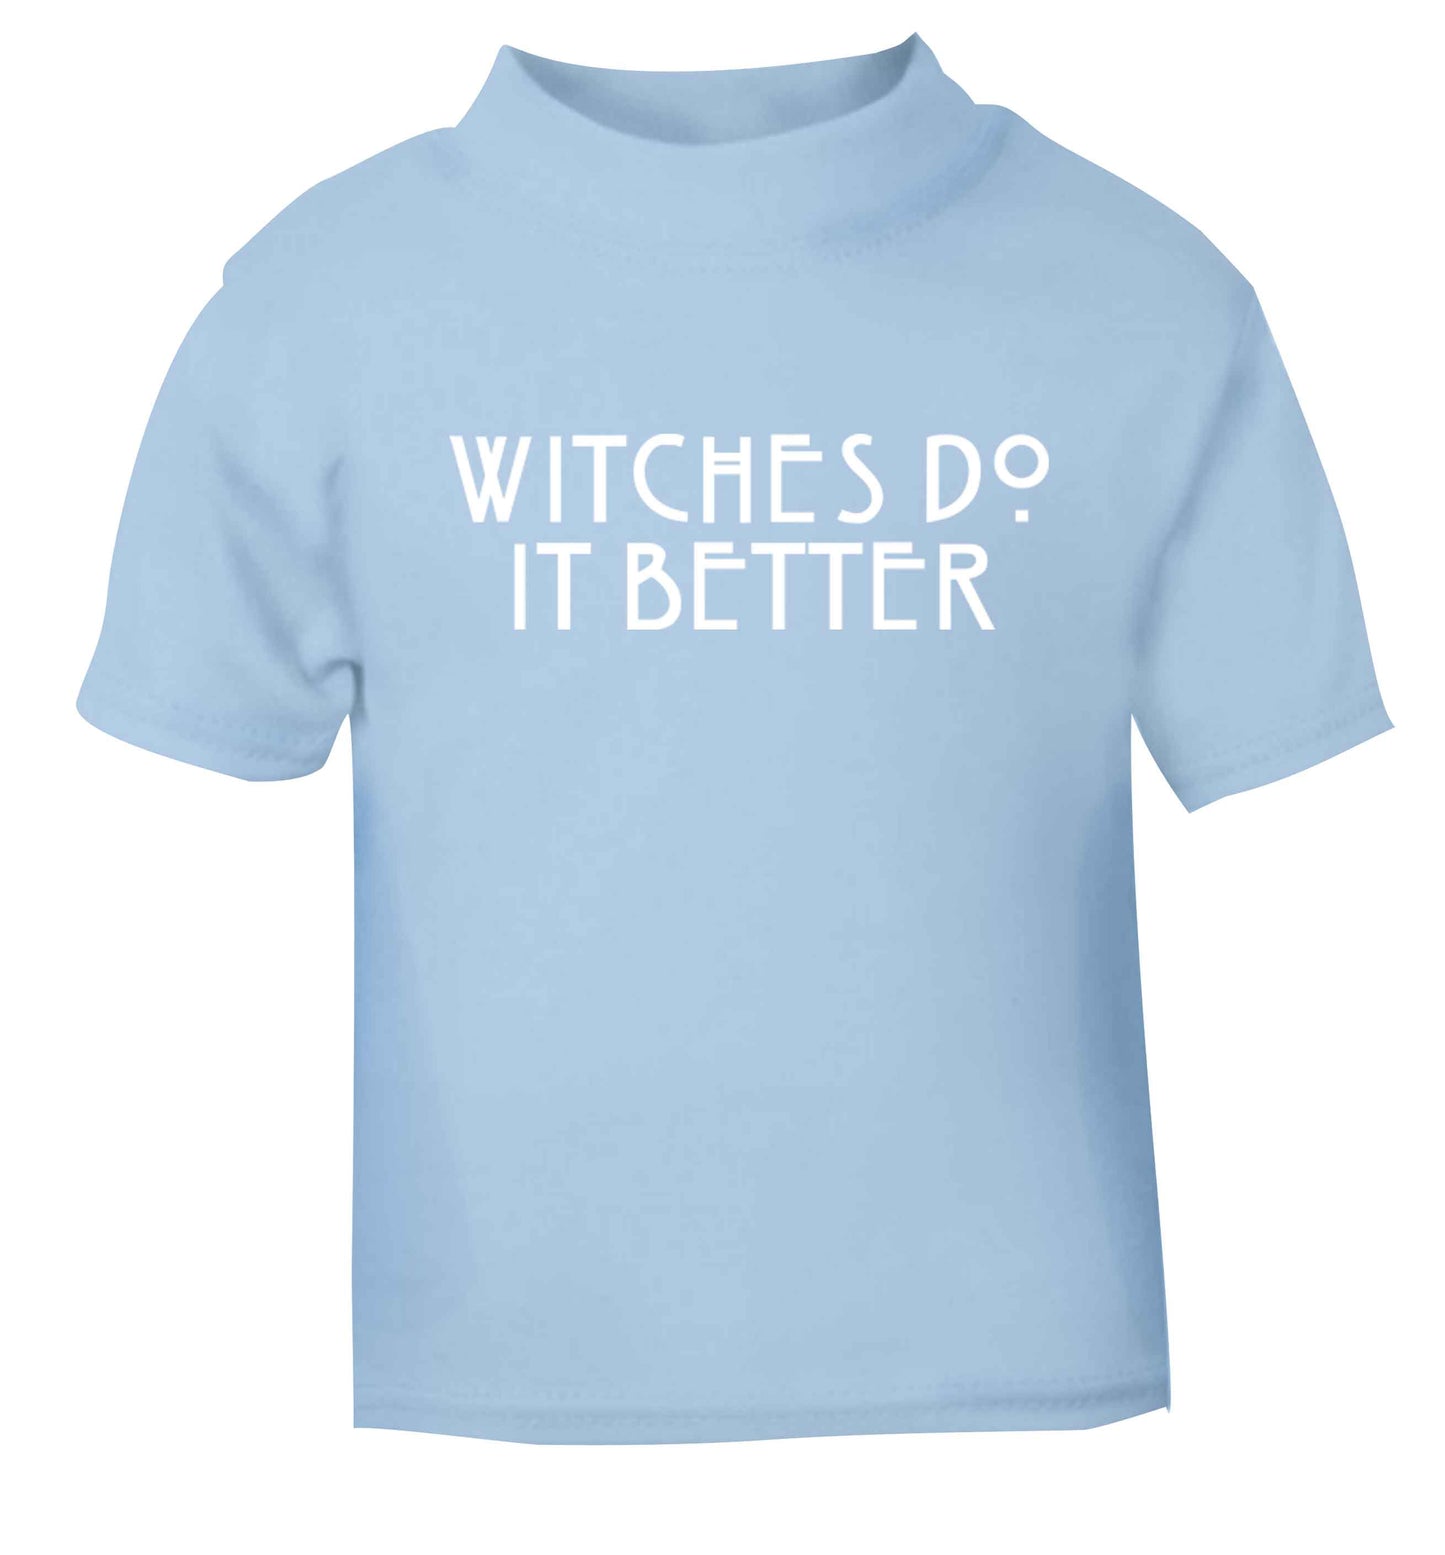 Witches do it better light blue baby toddler Tshirt 2 Years